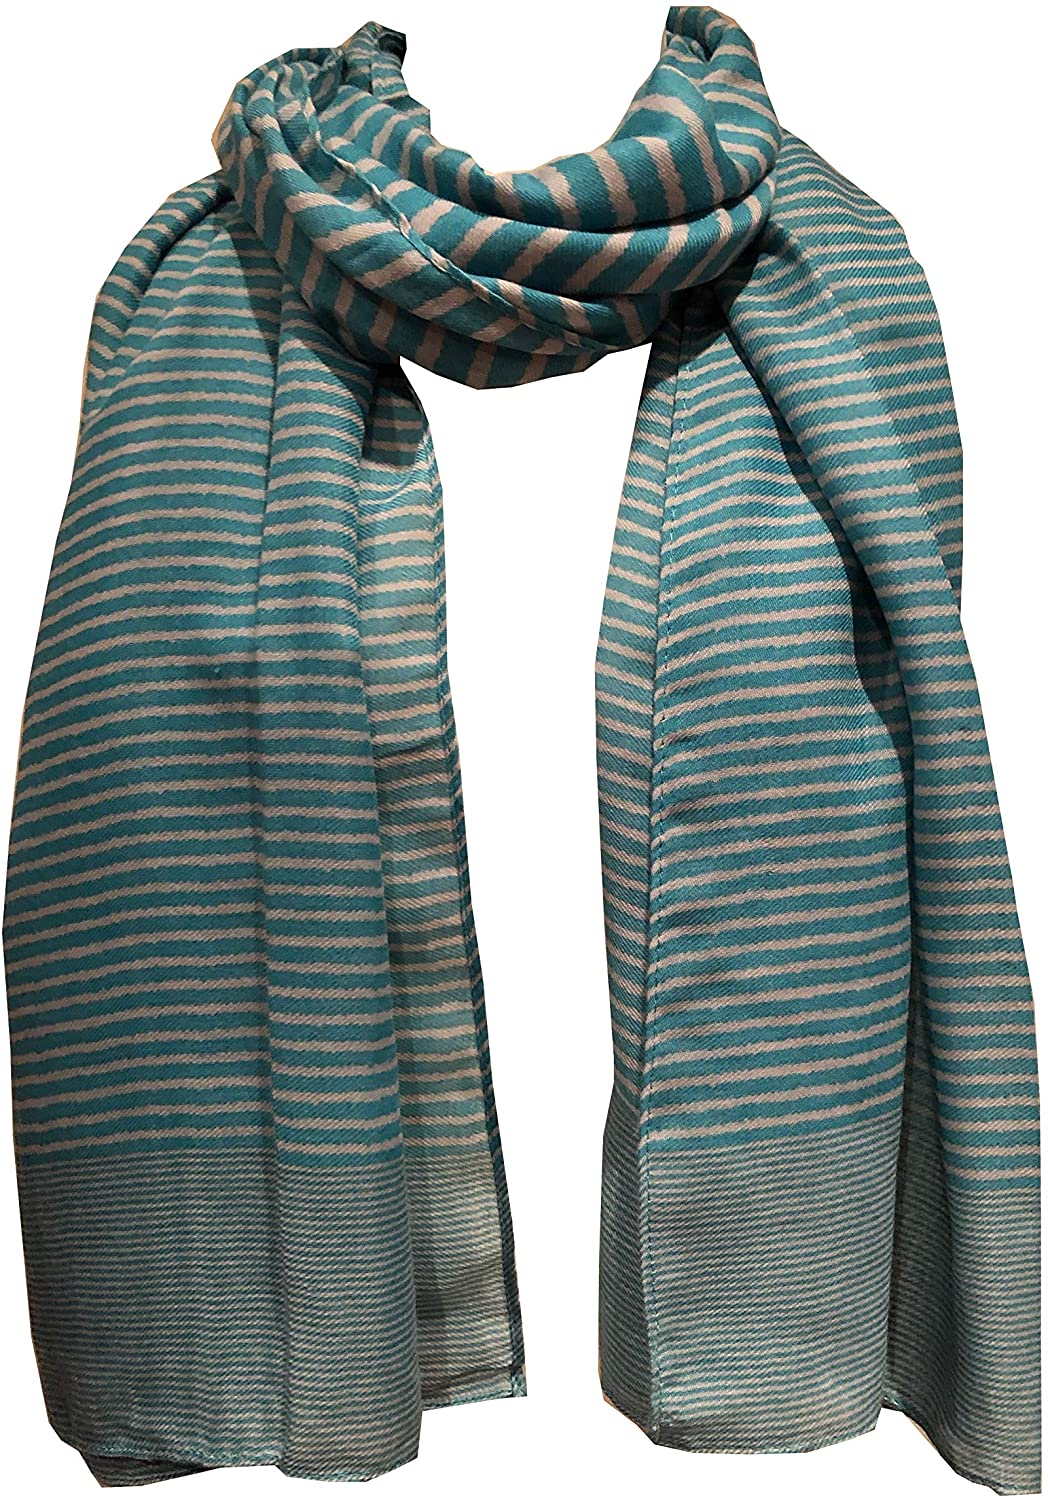 Pamper Yourself Now Turquoise with White Stripes Long Soft Scarf